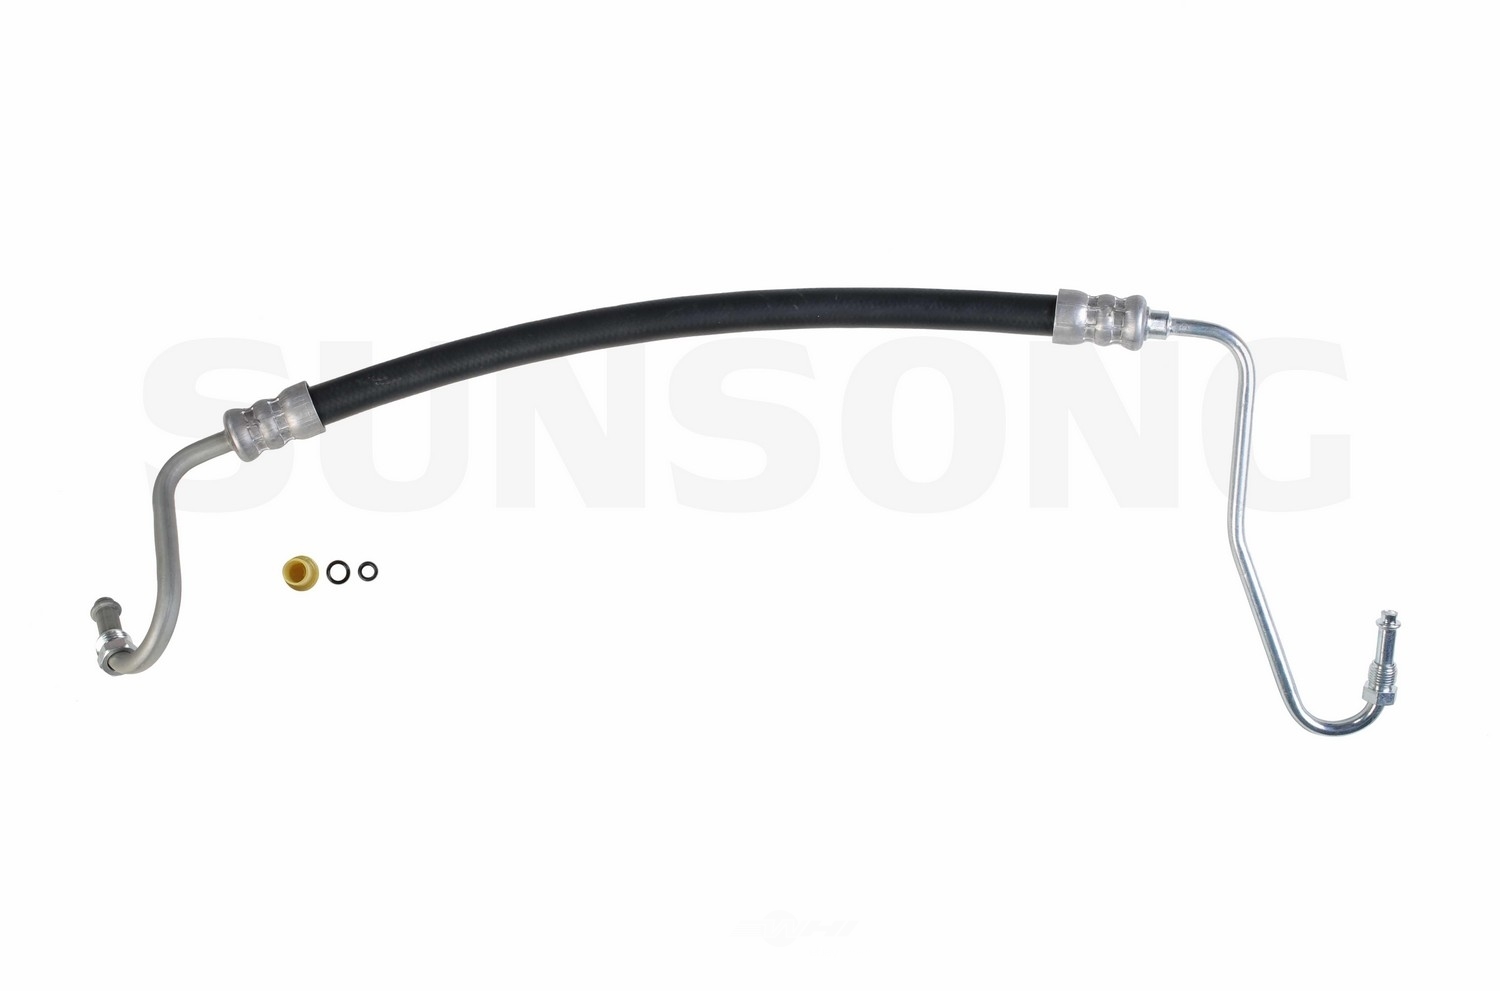 SUNSONG NORTH AMERICA - Power Steering Pressure Line Hose Assembly - SUG 3401458